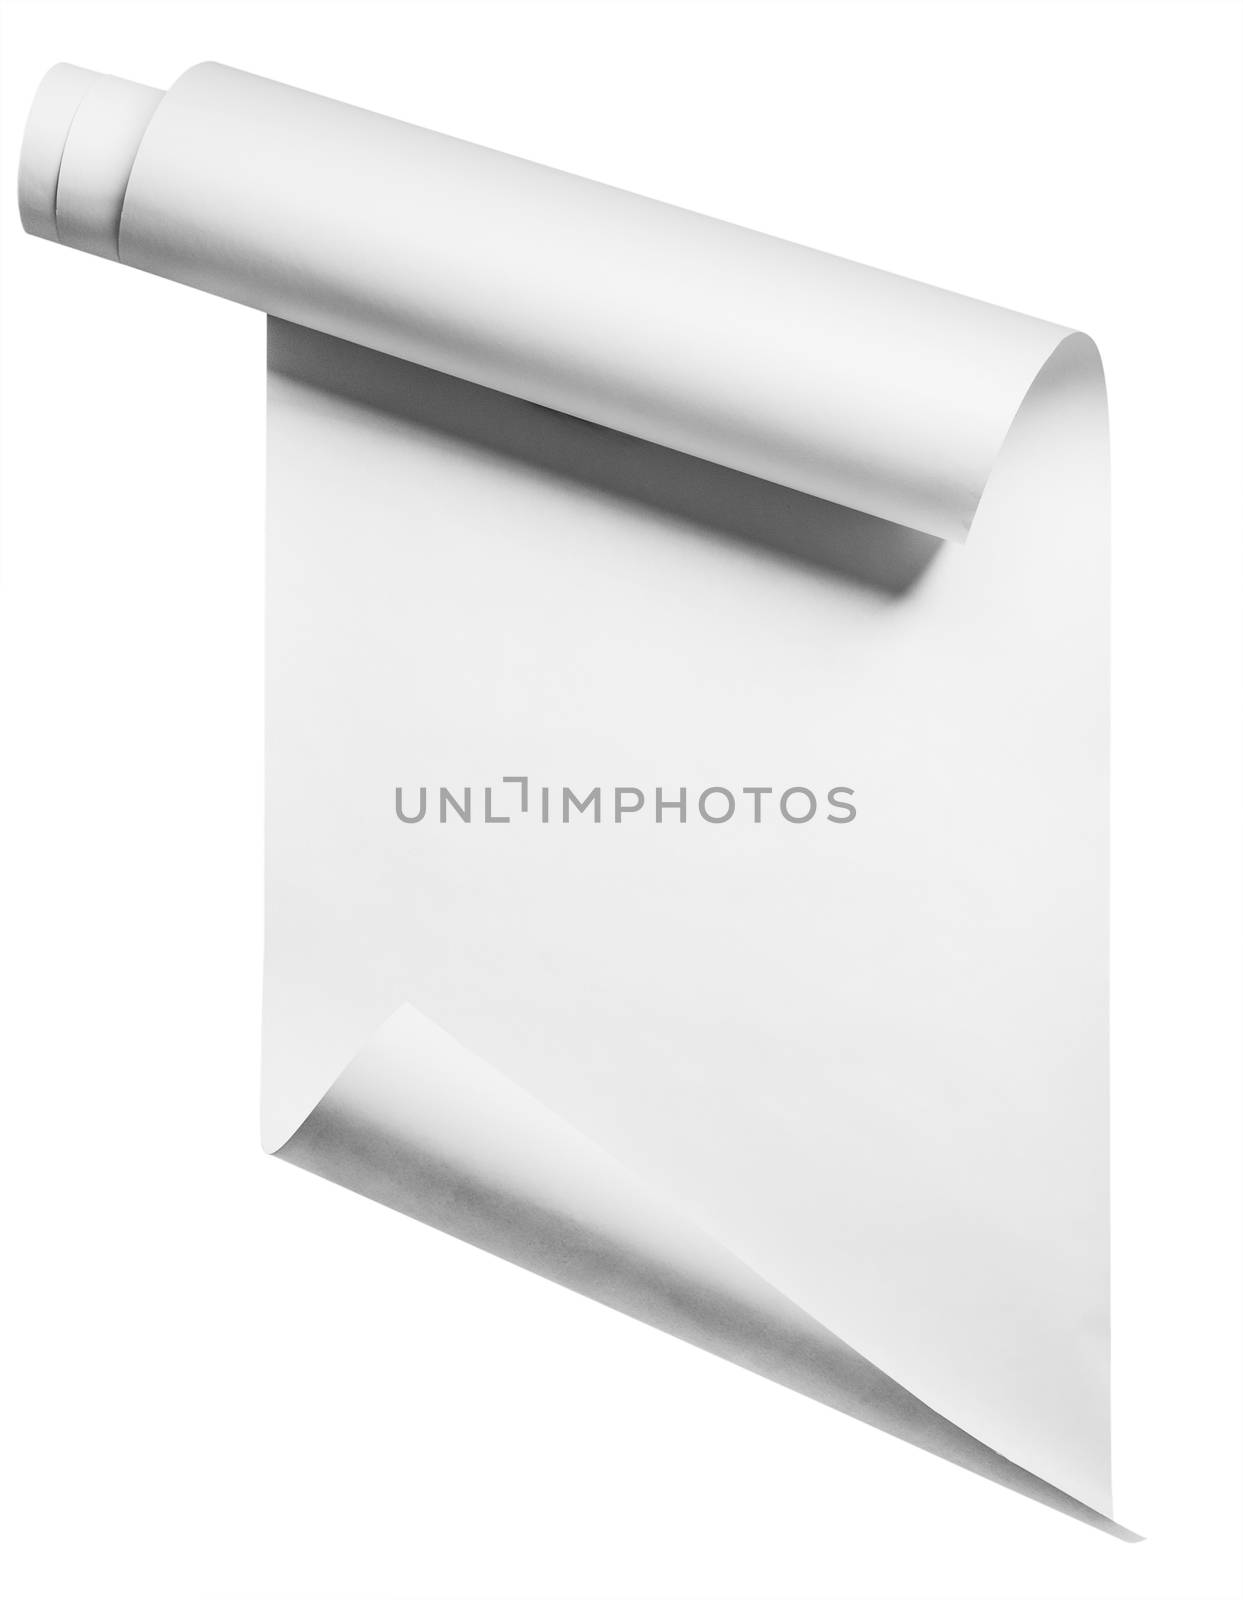 Paper roll on white, isolated with clipping path